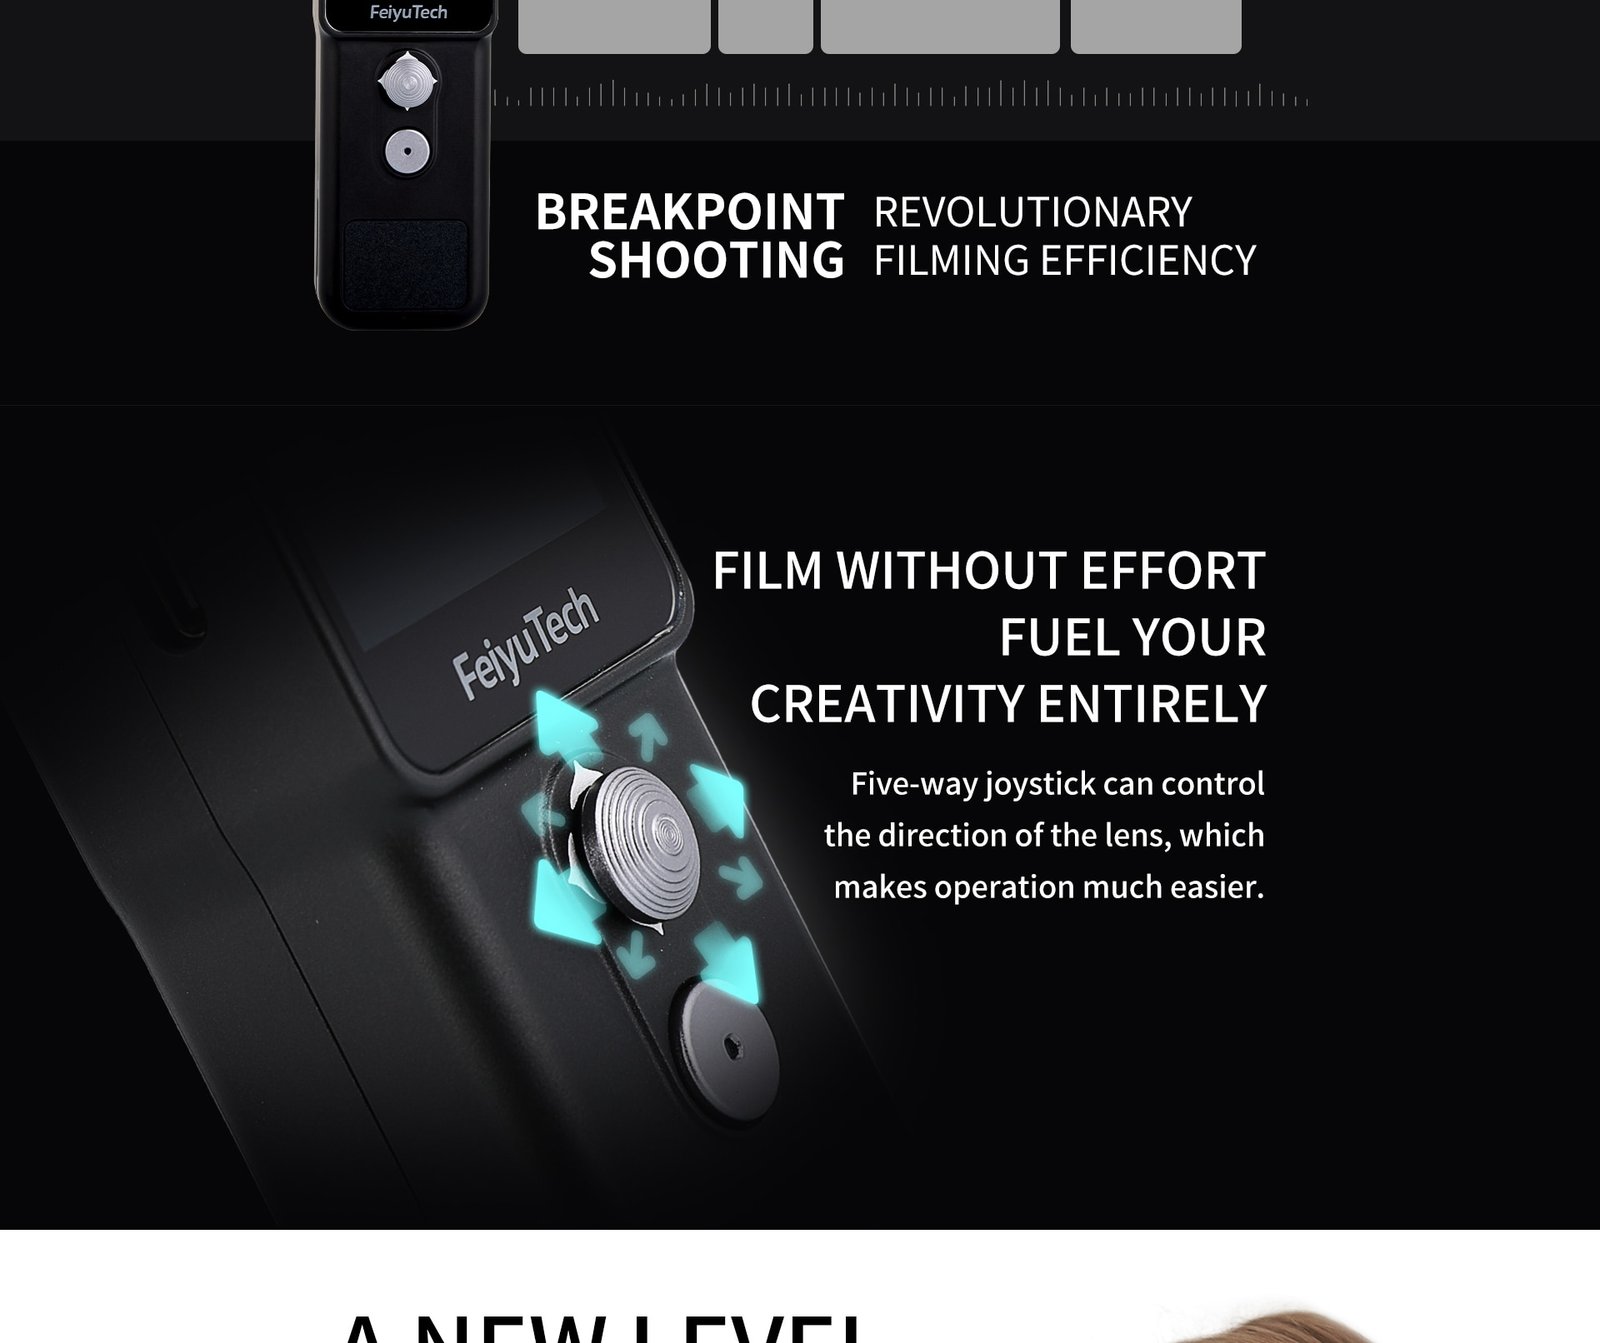 FeiyuTech OFFICIAL Feiyu Pocket 2 New 4K Video 3-axis camera stabilization with 12MP Photo External MIC Interface Action Camera